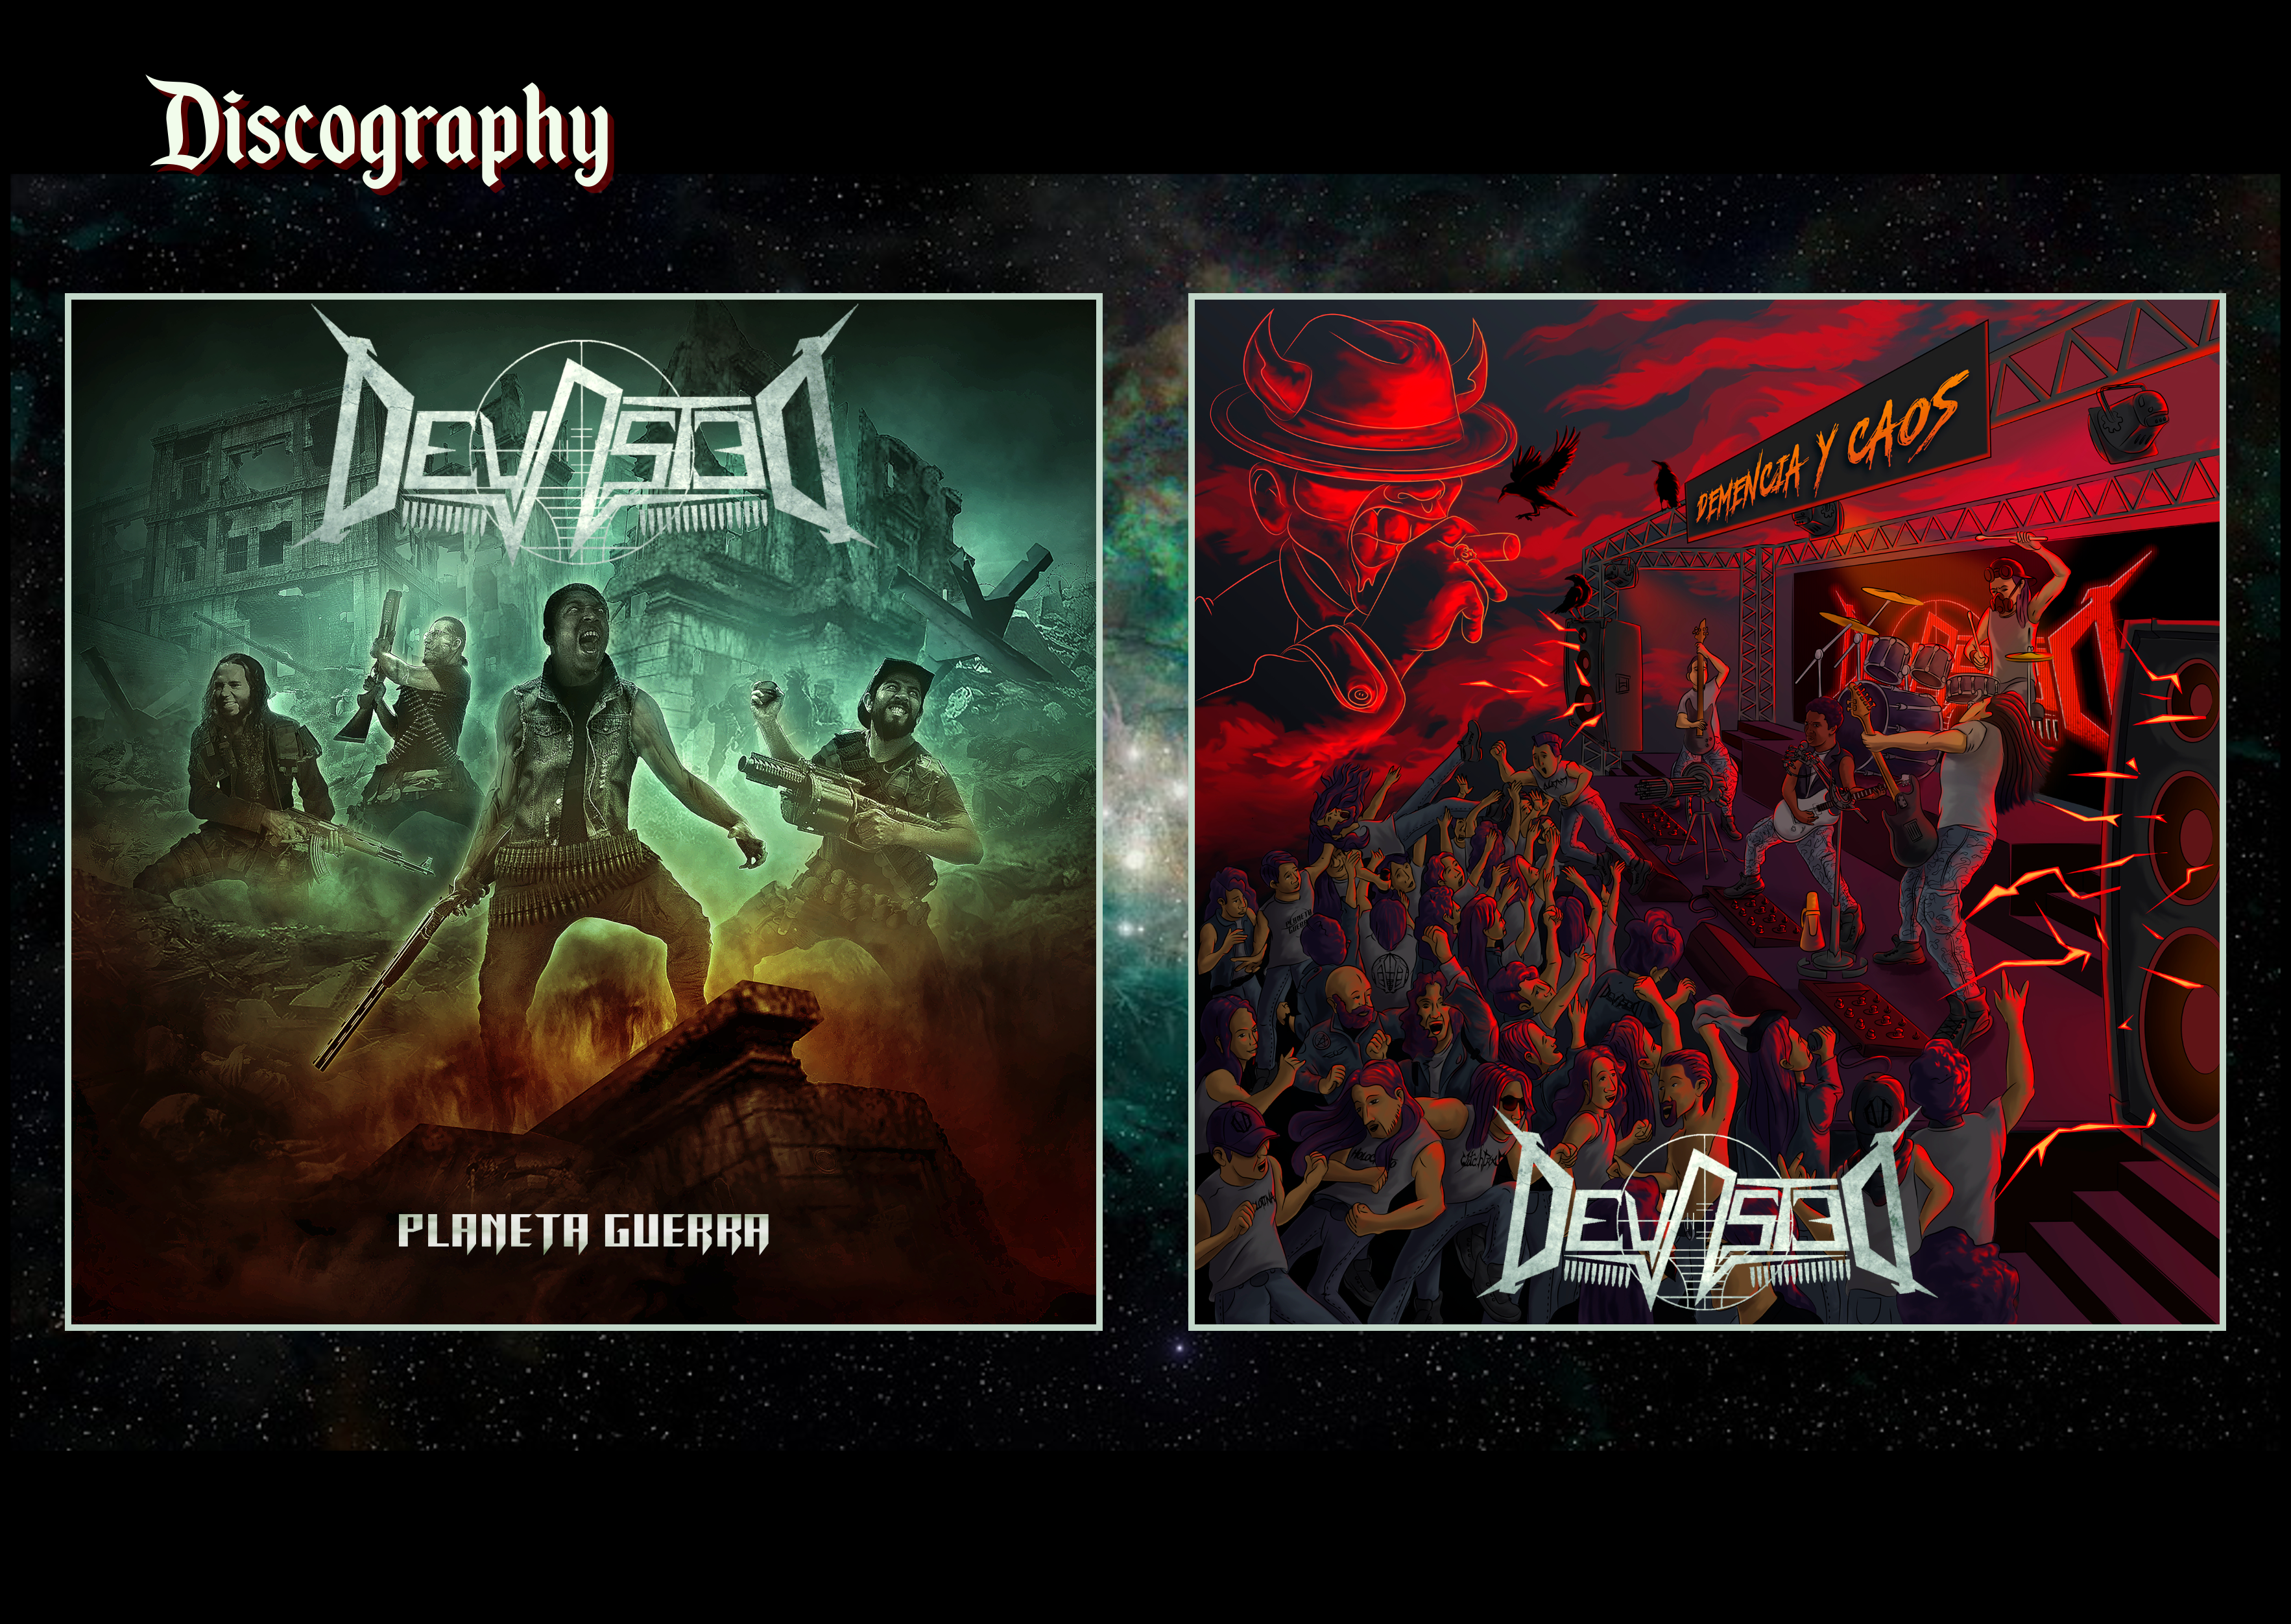 04. Discography 2